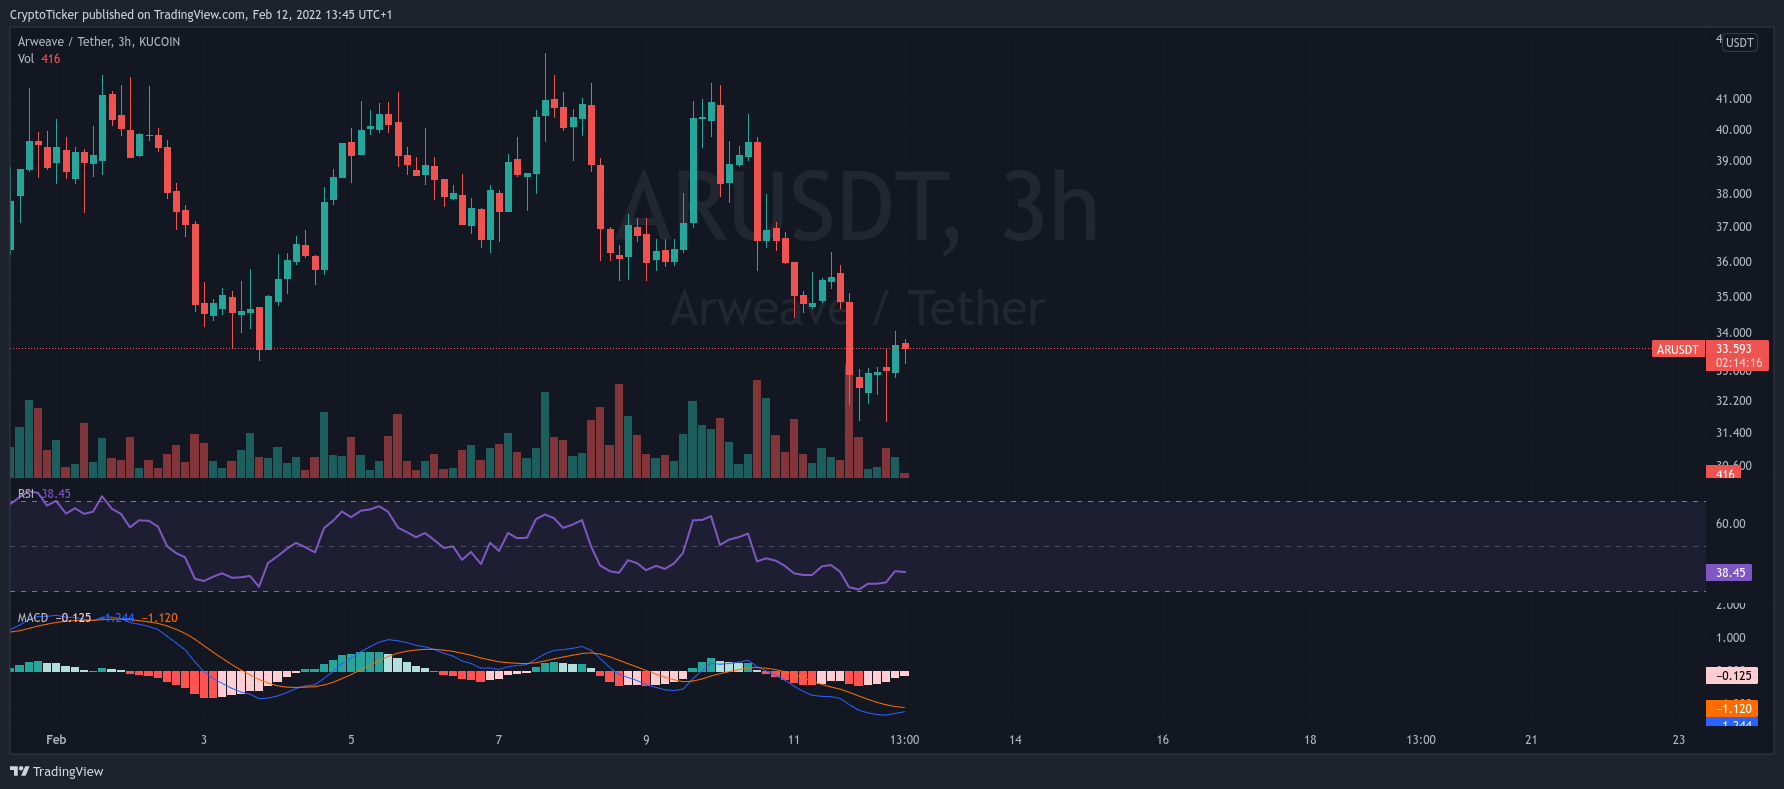 AR/USDT price chart showing the drop in prices